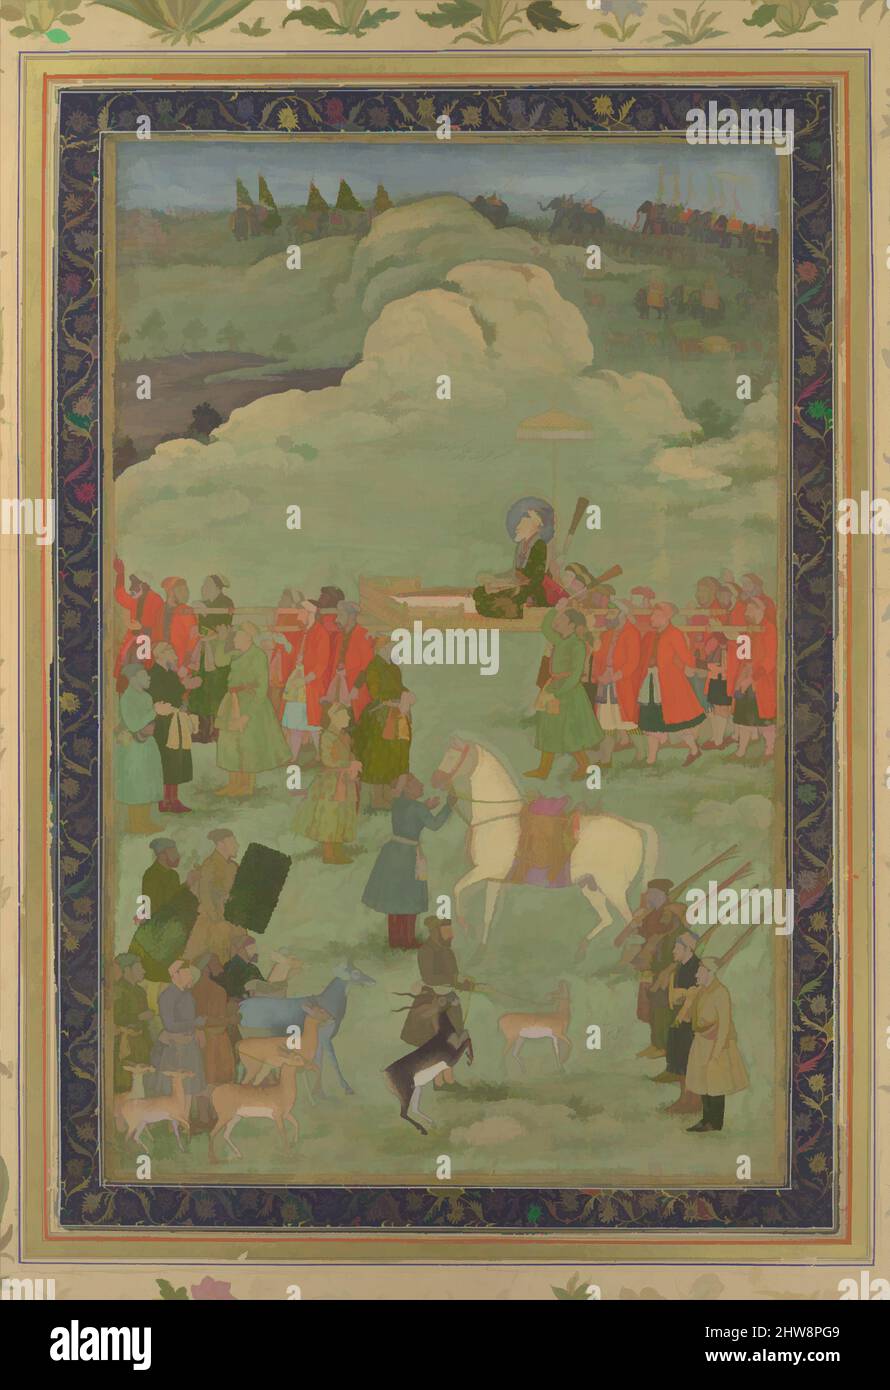 Art inspired by The Emperor Aurangzeb Carried on a Palanquin, ca. 1705–20, Made in India, Opaque watercolor and gold on paper, H. 22 7/8 in. (58.1 cm), Codices, Painting by Bhavanidas (active ca. 1700–1748), The emperor Aurangzeb (r. 1656–1707) and his royal hunting party are shown, Classic works modernized by Artotop with a splash of modernity. Shapes, color and value, eye-catching visual impact on art. Emotions through freedom of artworks in a contemporary way. A timeless message pursuing a wildly creative new direction. Artists turning to the digital medium and creating the Artotop NFT Stock Photo